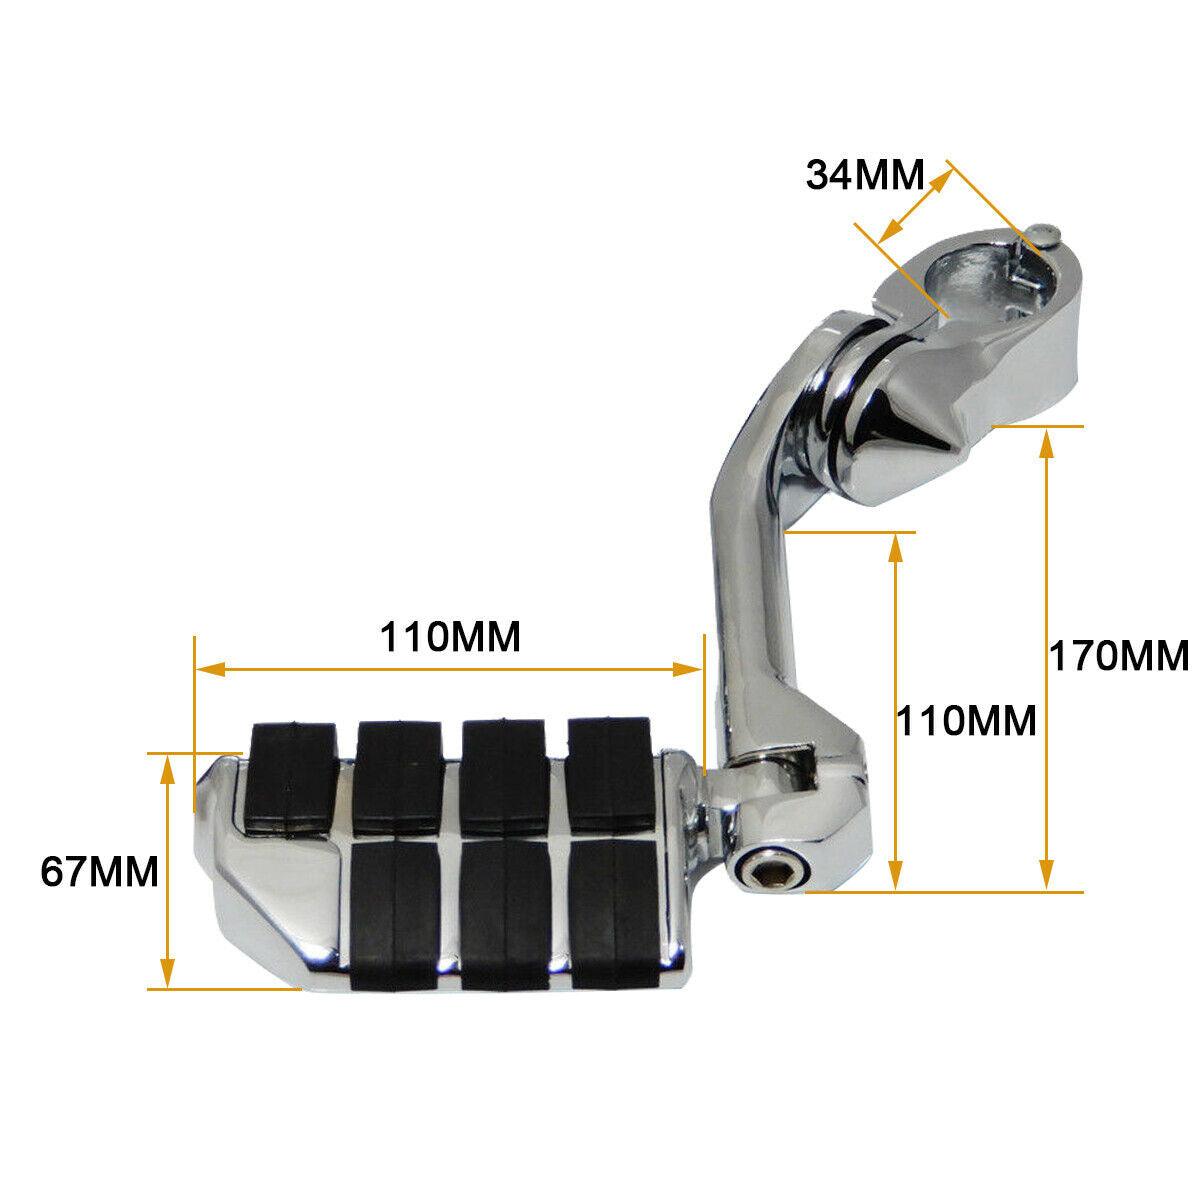 1 1/4" Engine Guard Mounts Clamps Highway Foot Pegs Footrest Fit For Harley US - Moto Life Products